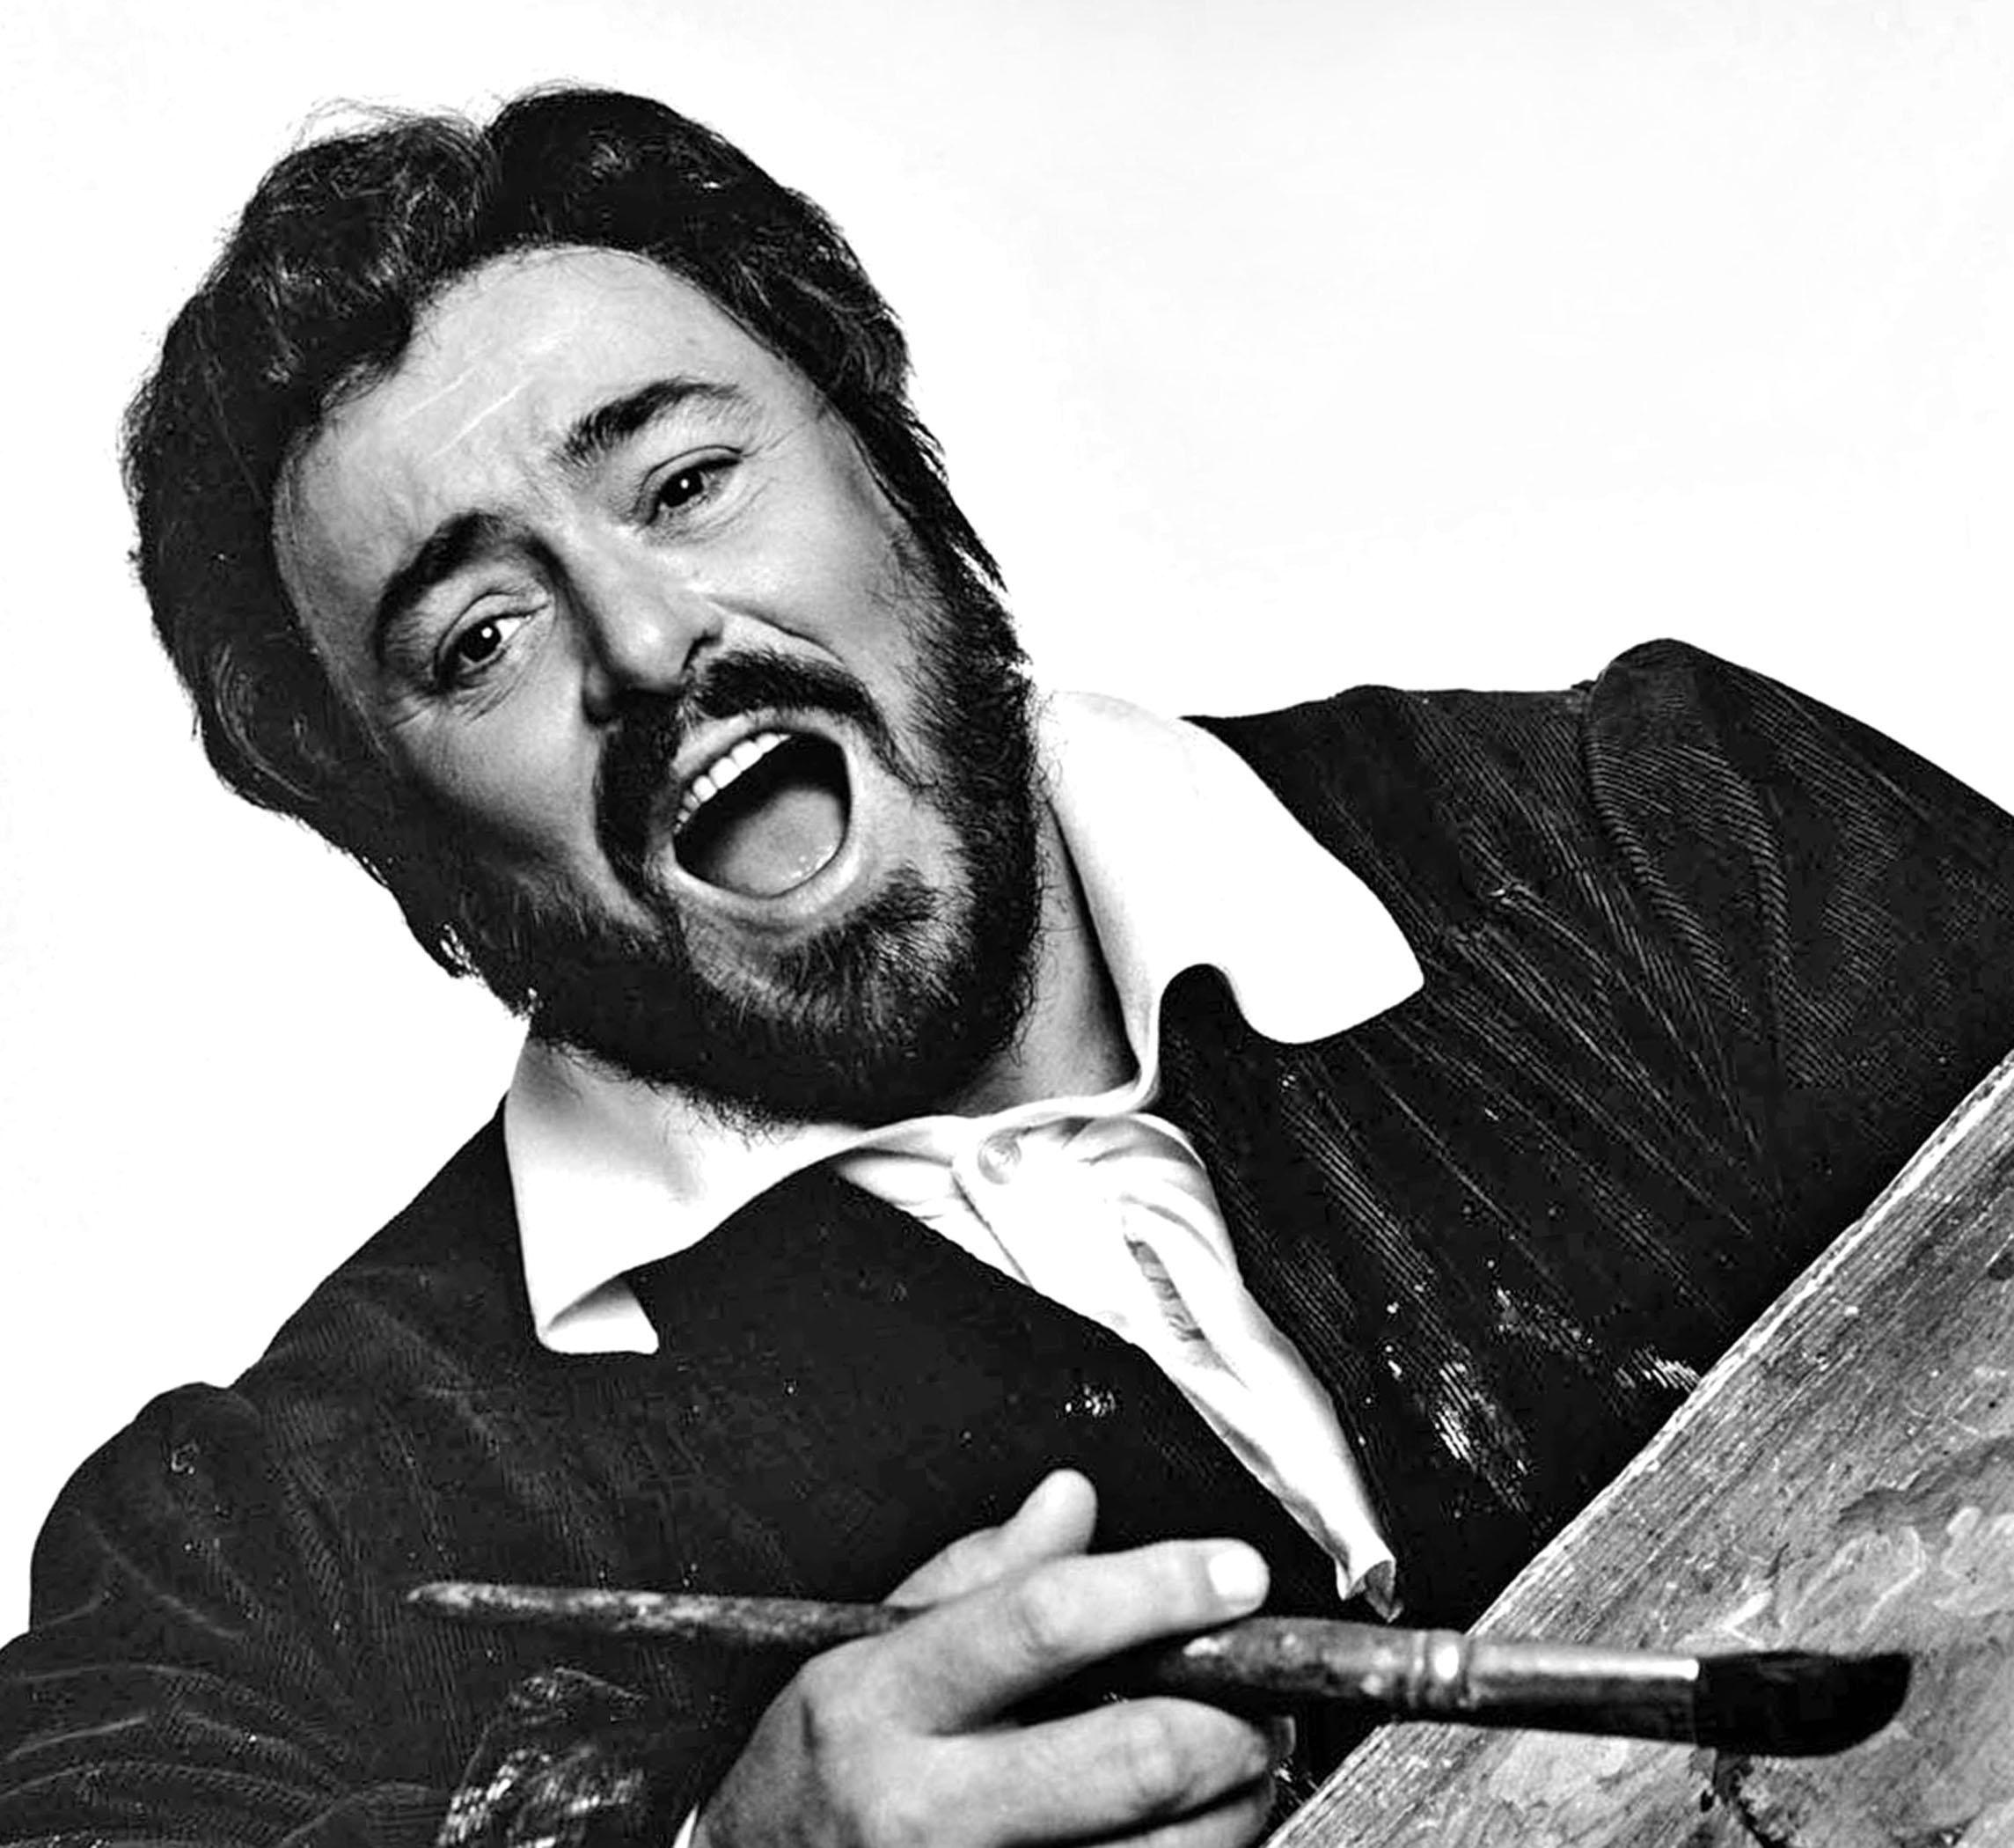 Tenor Luciano Pavarotti performing in full costume for 'La Bohème' at the MET - Photograph by Jack Mitchell